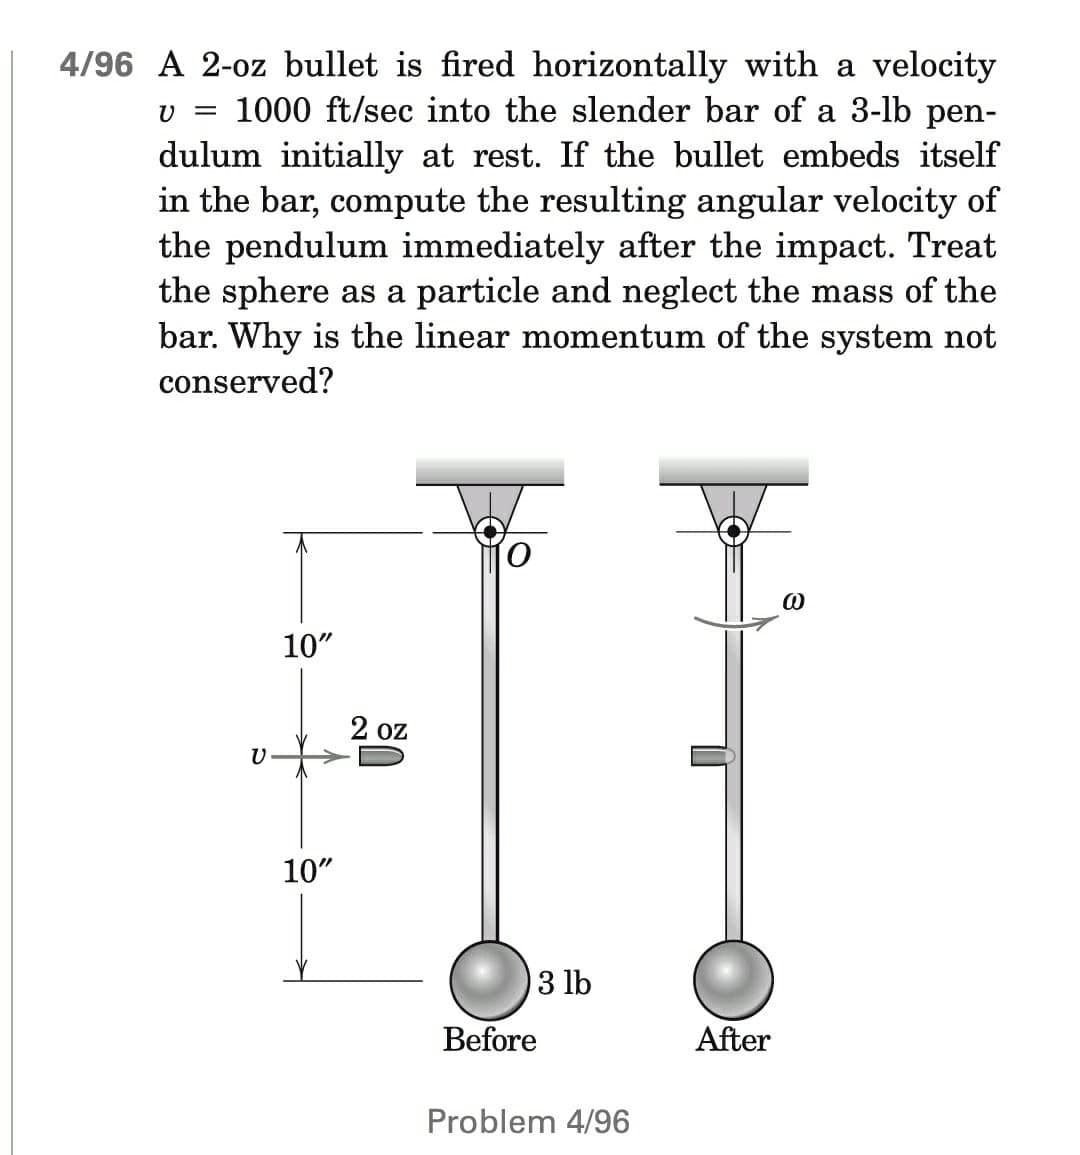 4/96 A 2-oz bullet is fired horizontally with a velocity
v = 1000 ft/sec into the slender bar of a 3-lb pen-
dulum initially at rest. If the bullet embeds itself
in the bar, compute the resulting angular velocity of
the pendulum immediately after the impact. Treat
the sphere as a particle and neglect the mass of the
bar. Why is the linear momentum of the system not
conserved?
O
@
10"
C
10"
2 oz
3 lb
Before
Problem 4/96
After